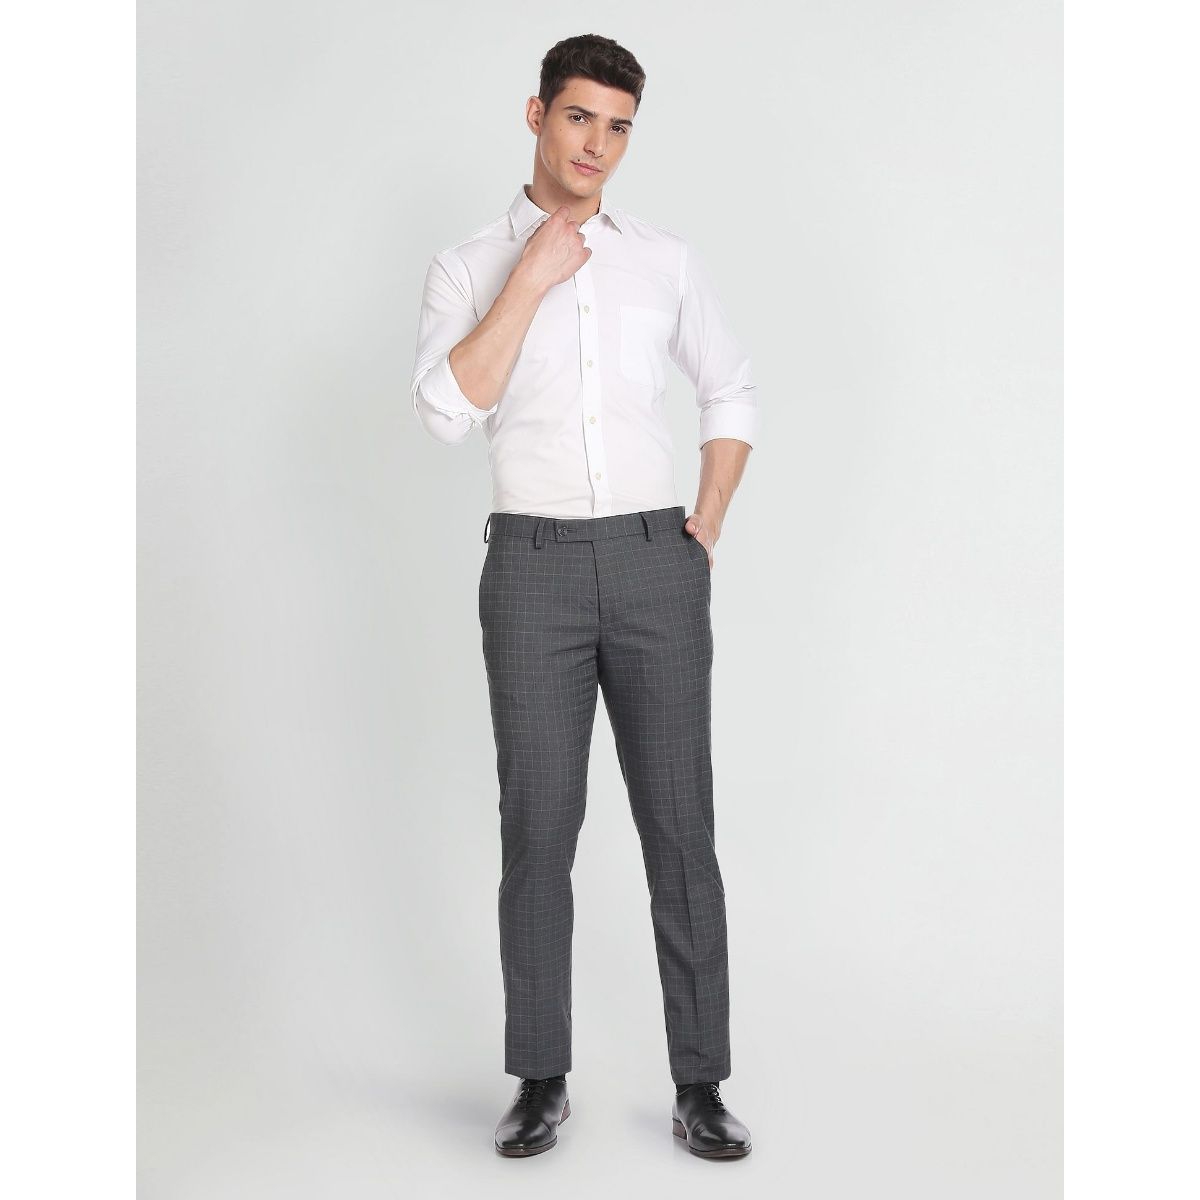 Brown Trousers | Buy Brown Trousers Online in India at Best Price